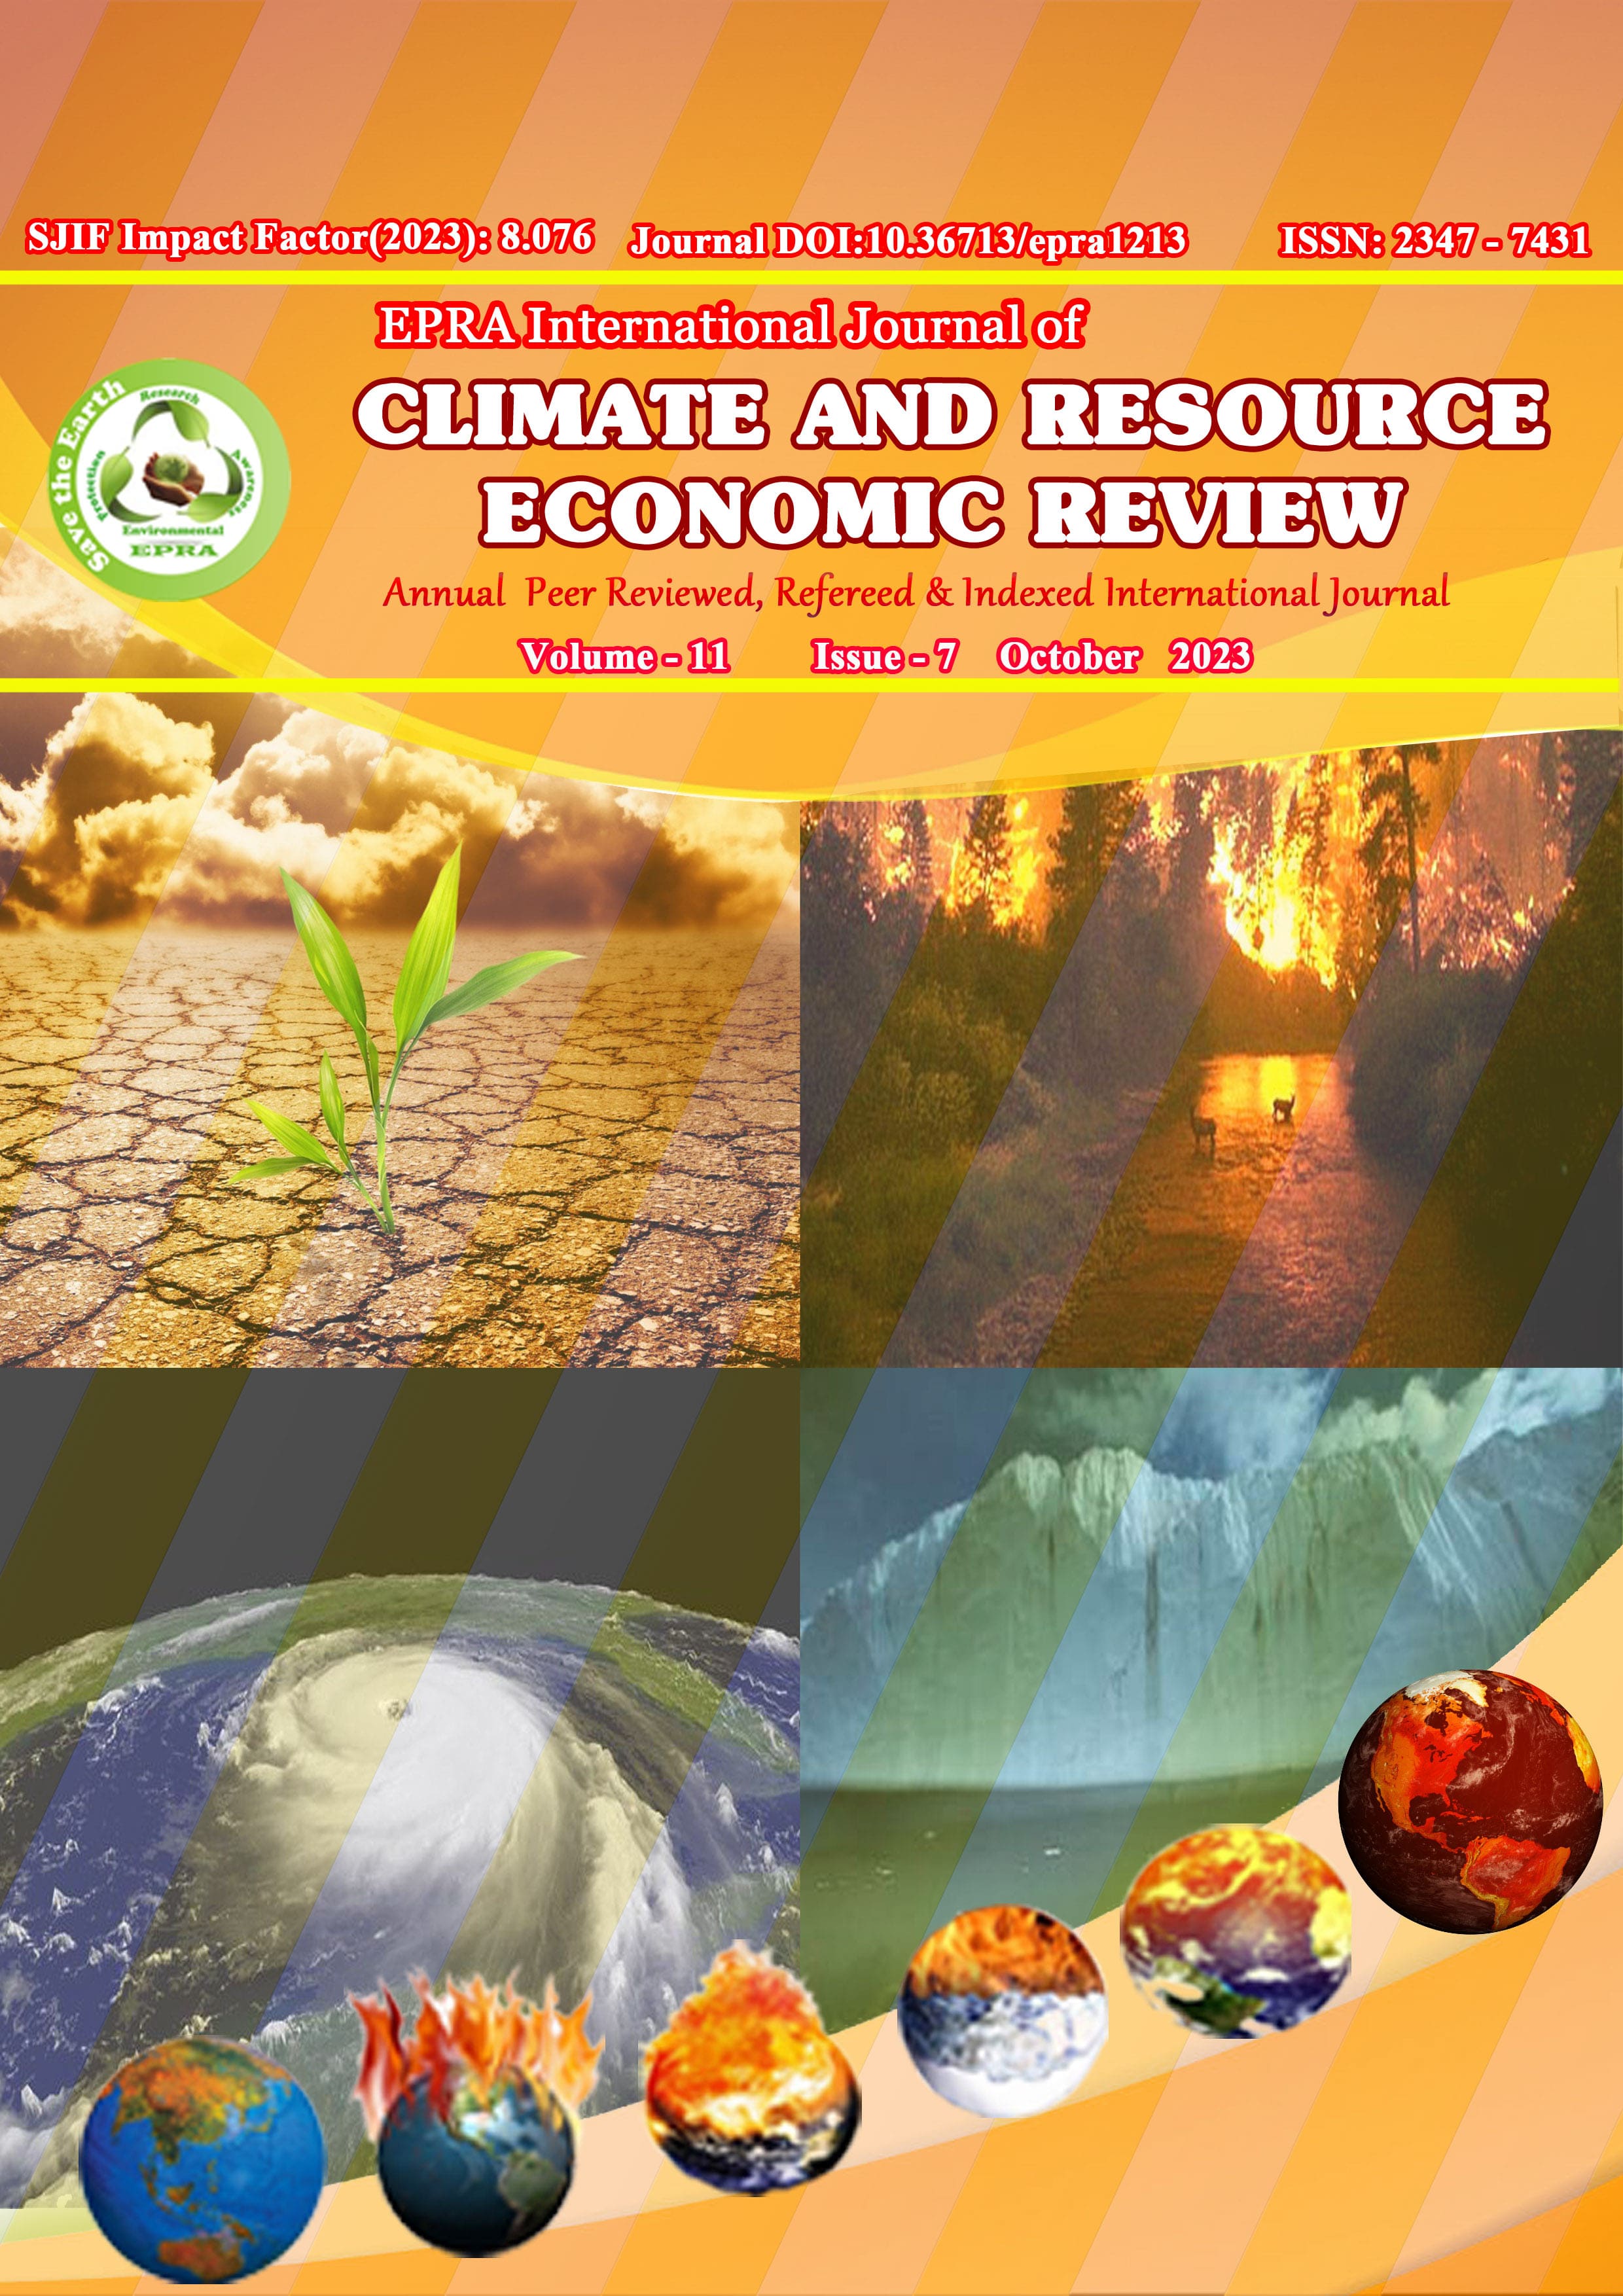 					View Vol. 11 No. 7 (2023): EPRA International Journal of Climate and Resource Economic Review(CRER)
				